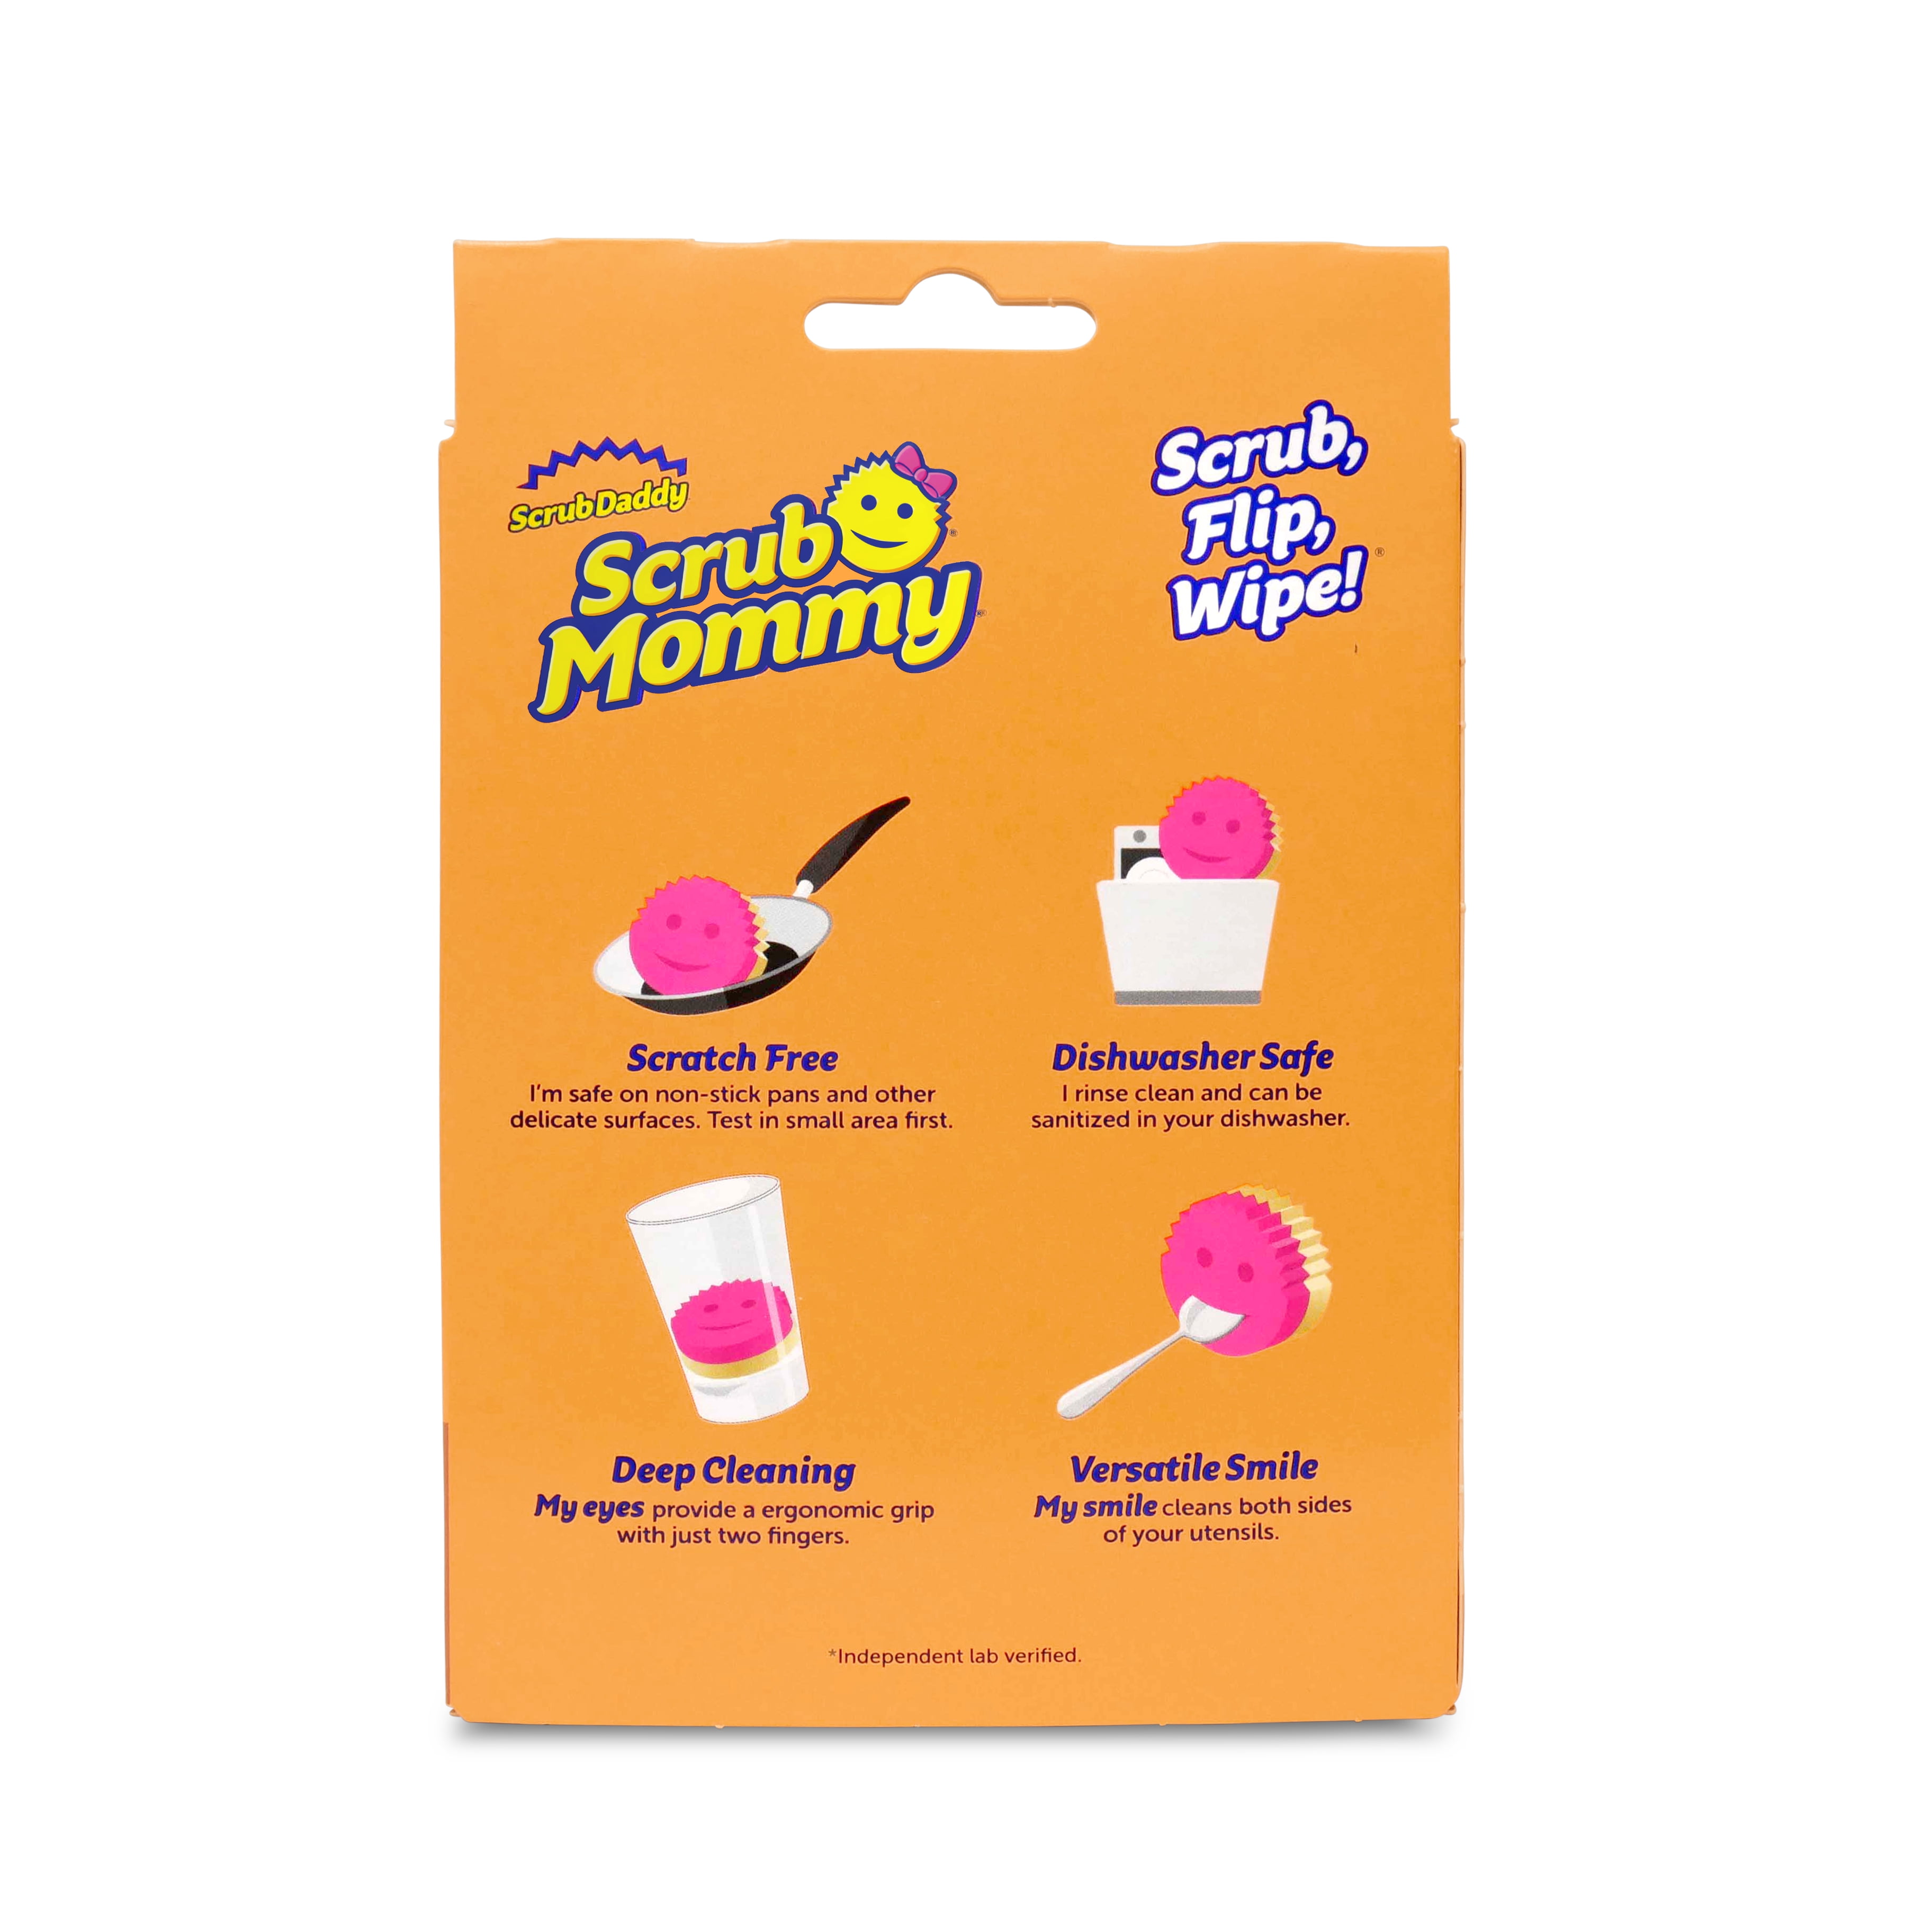 Scrub Mommy 4 Piece-Sponge Gift Set 2-Pack Only $23.99 at Woot